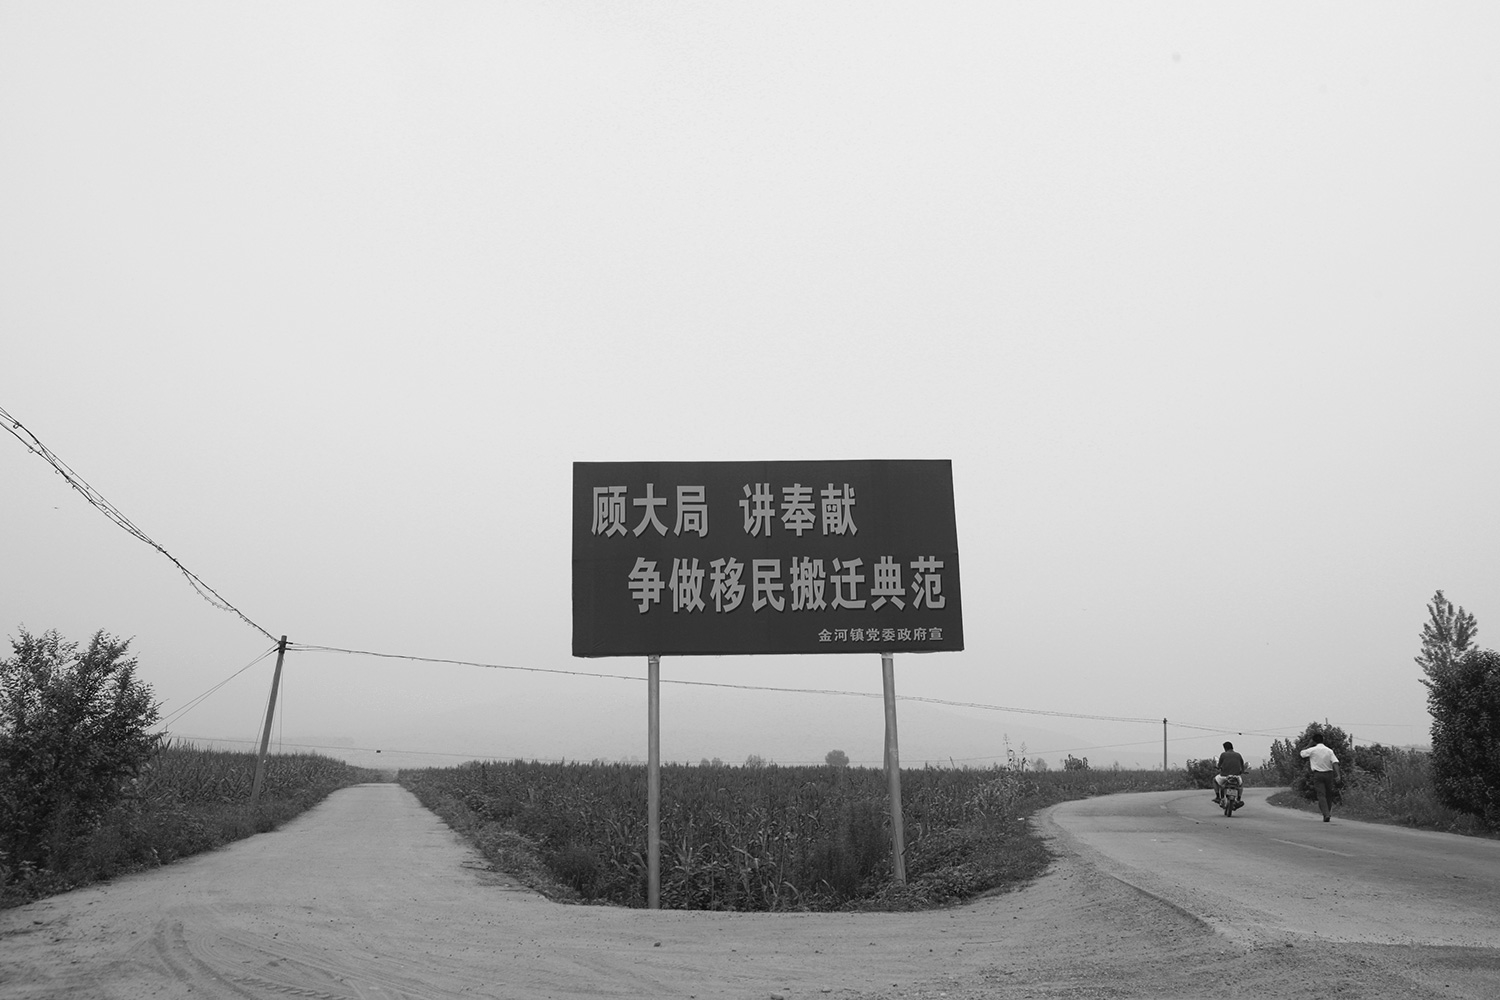 Slogans like this one, which reads “Look at the Big Picture, Be Willing to Sacrifice, Strive to Become an Exemplary Migration Town,” are all over the resettled area, urging farmers to demolish their houses.